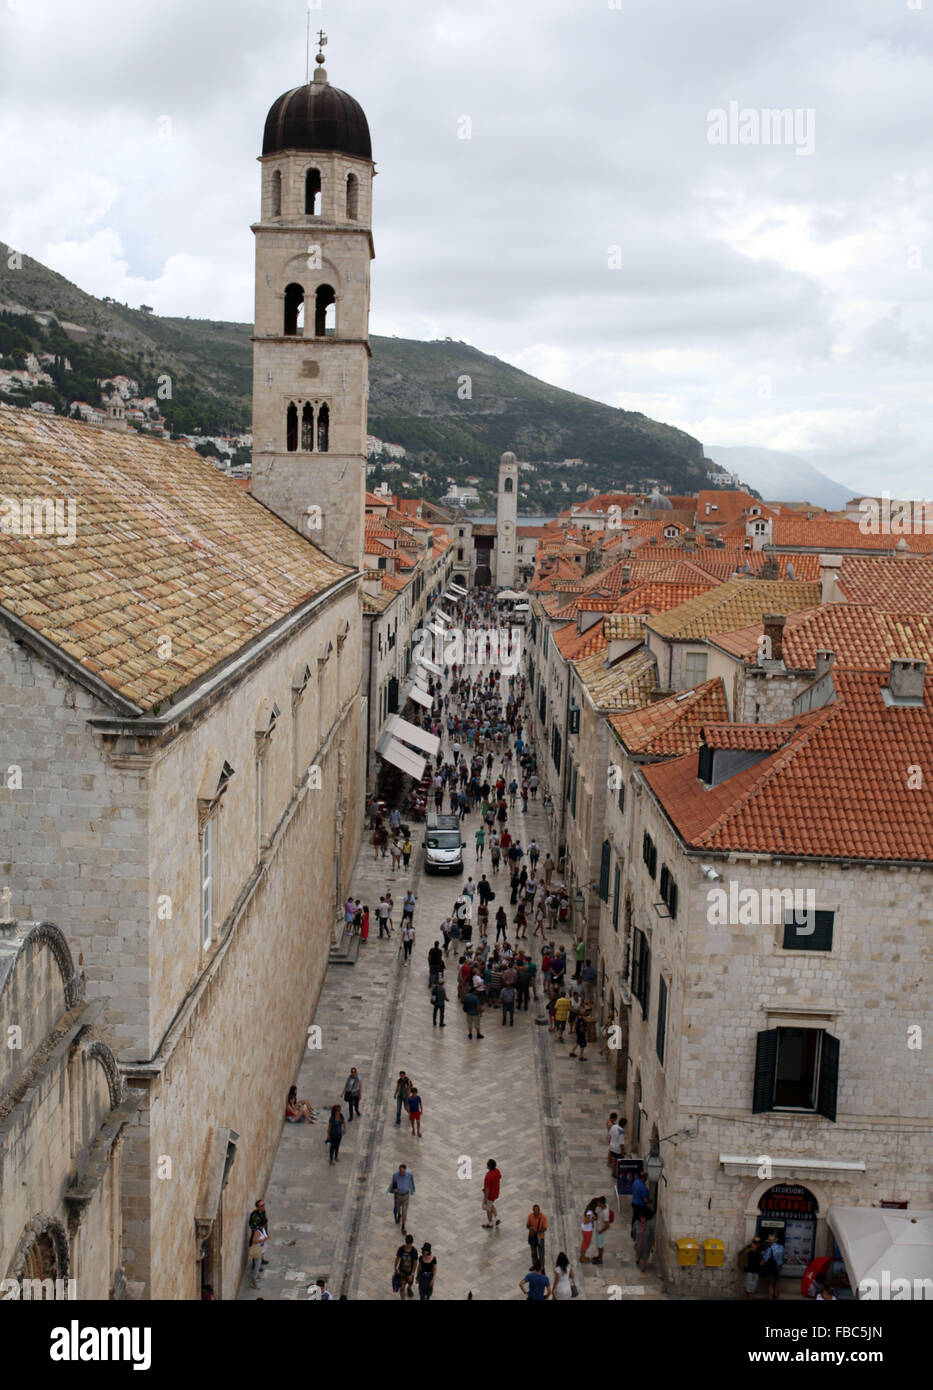 View of the Stradun, the main street inside the Walled City of Dubrovnik, UNESCO World Heritage Site, Croatia, Europe Stock Photo